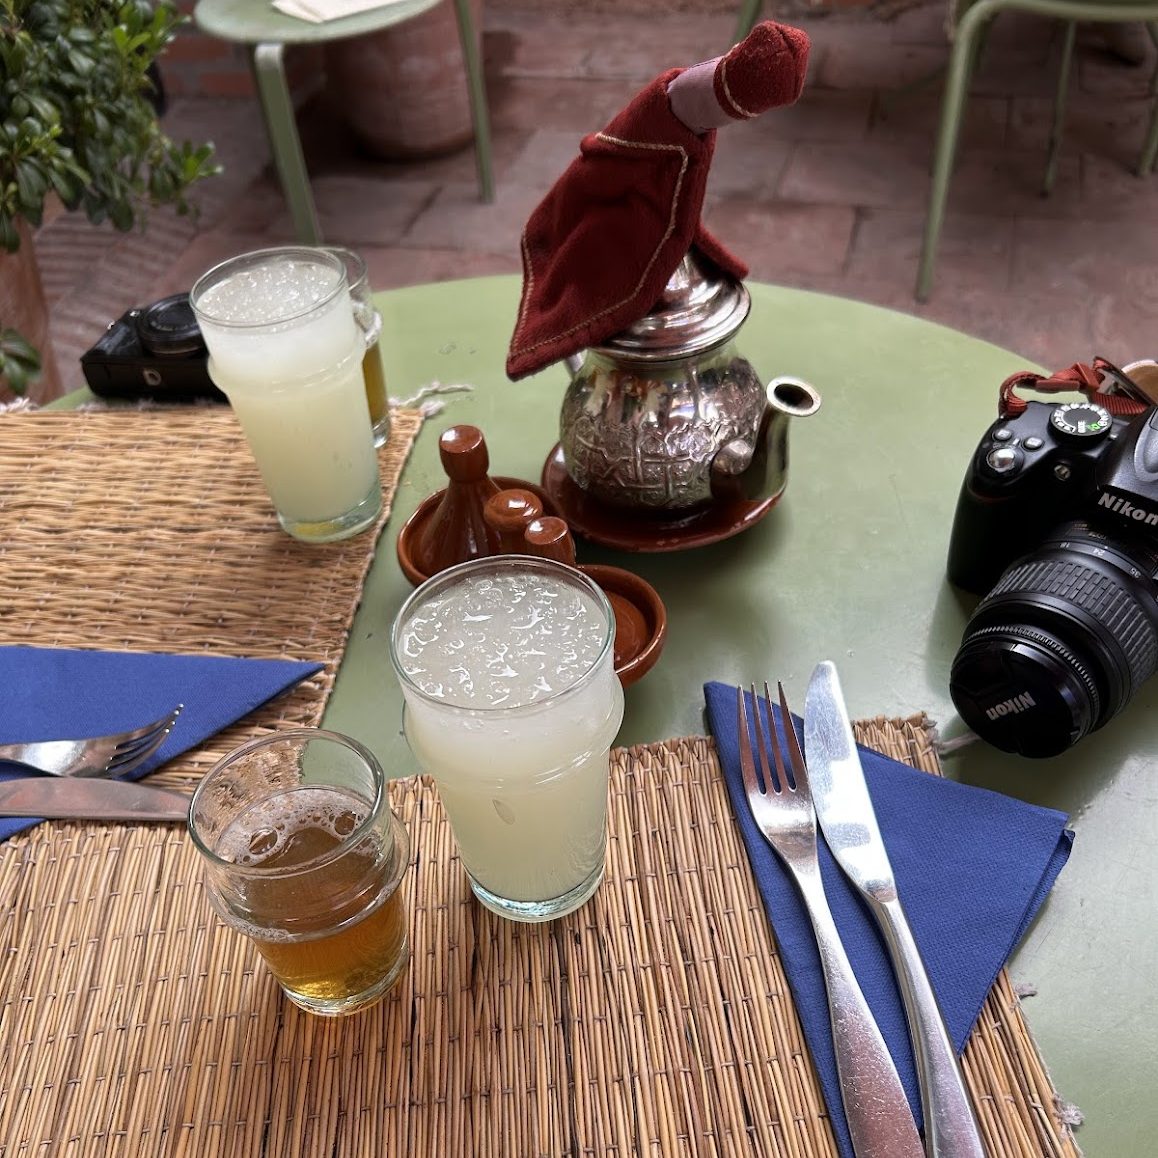 A table with several cups of tea and lemonade, and two cameras